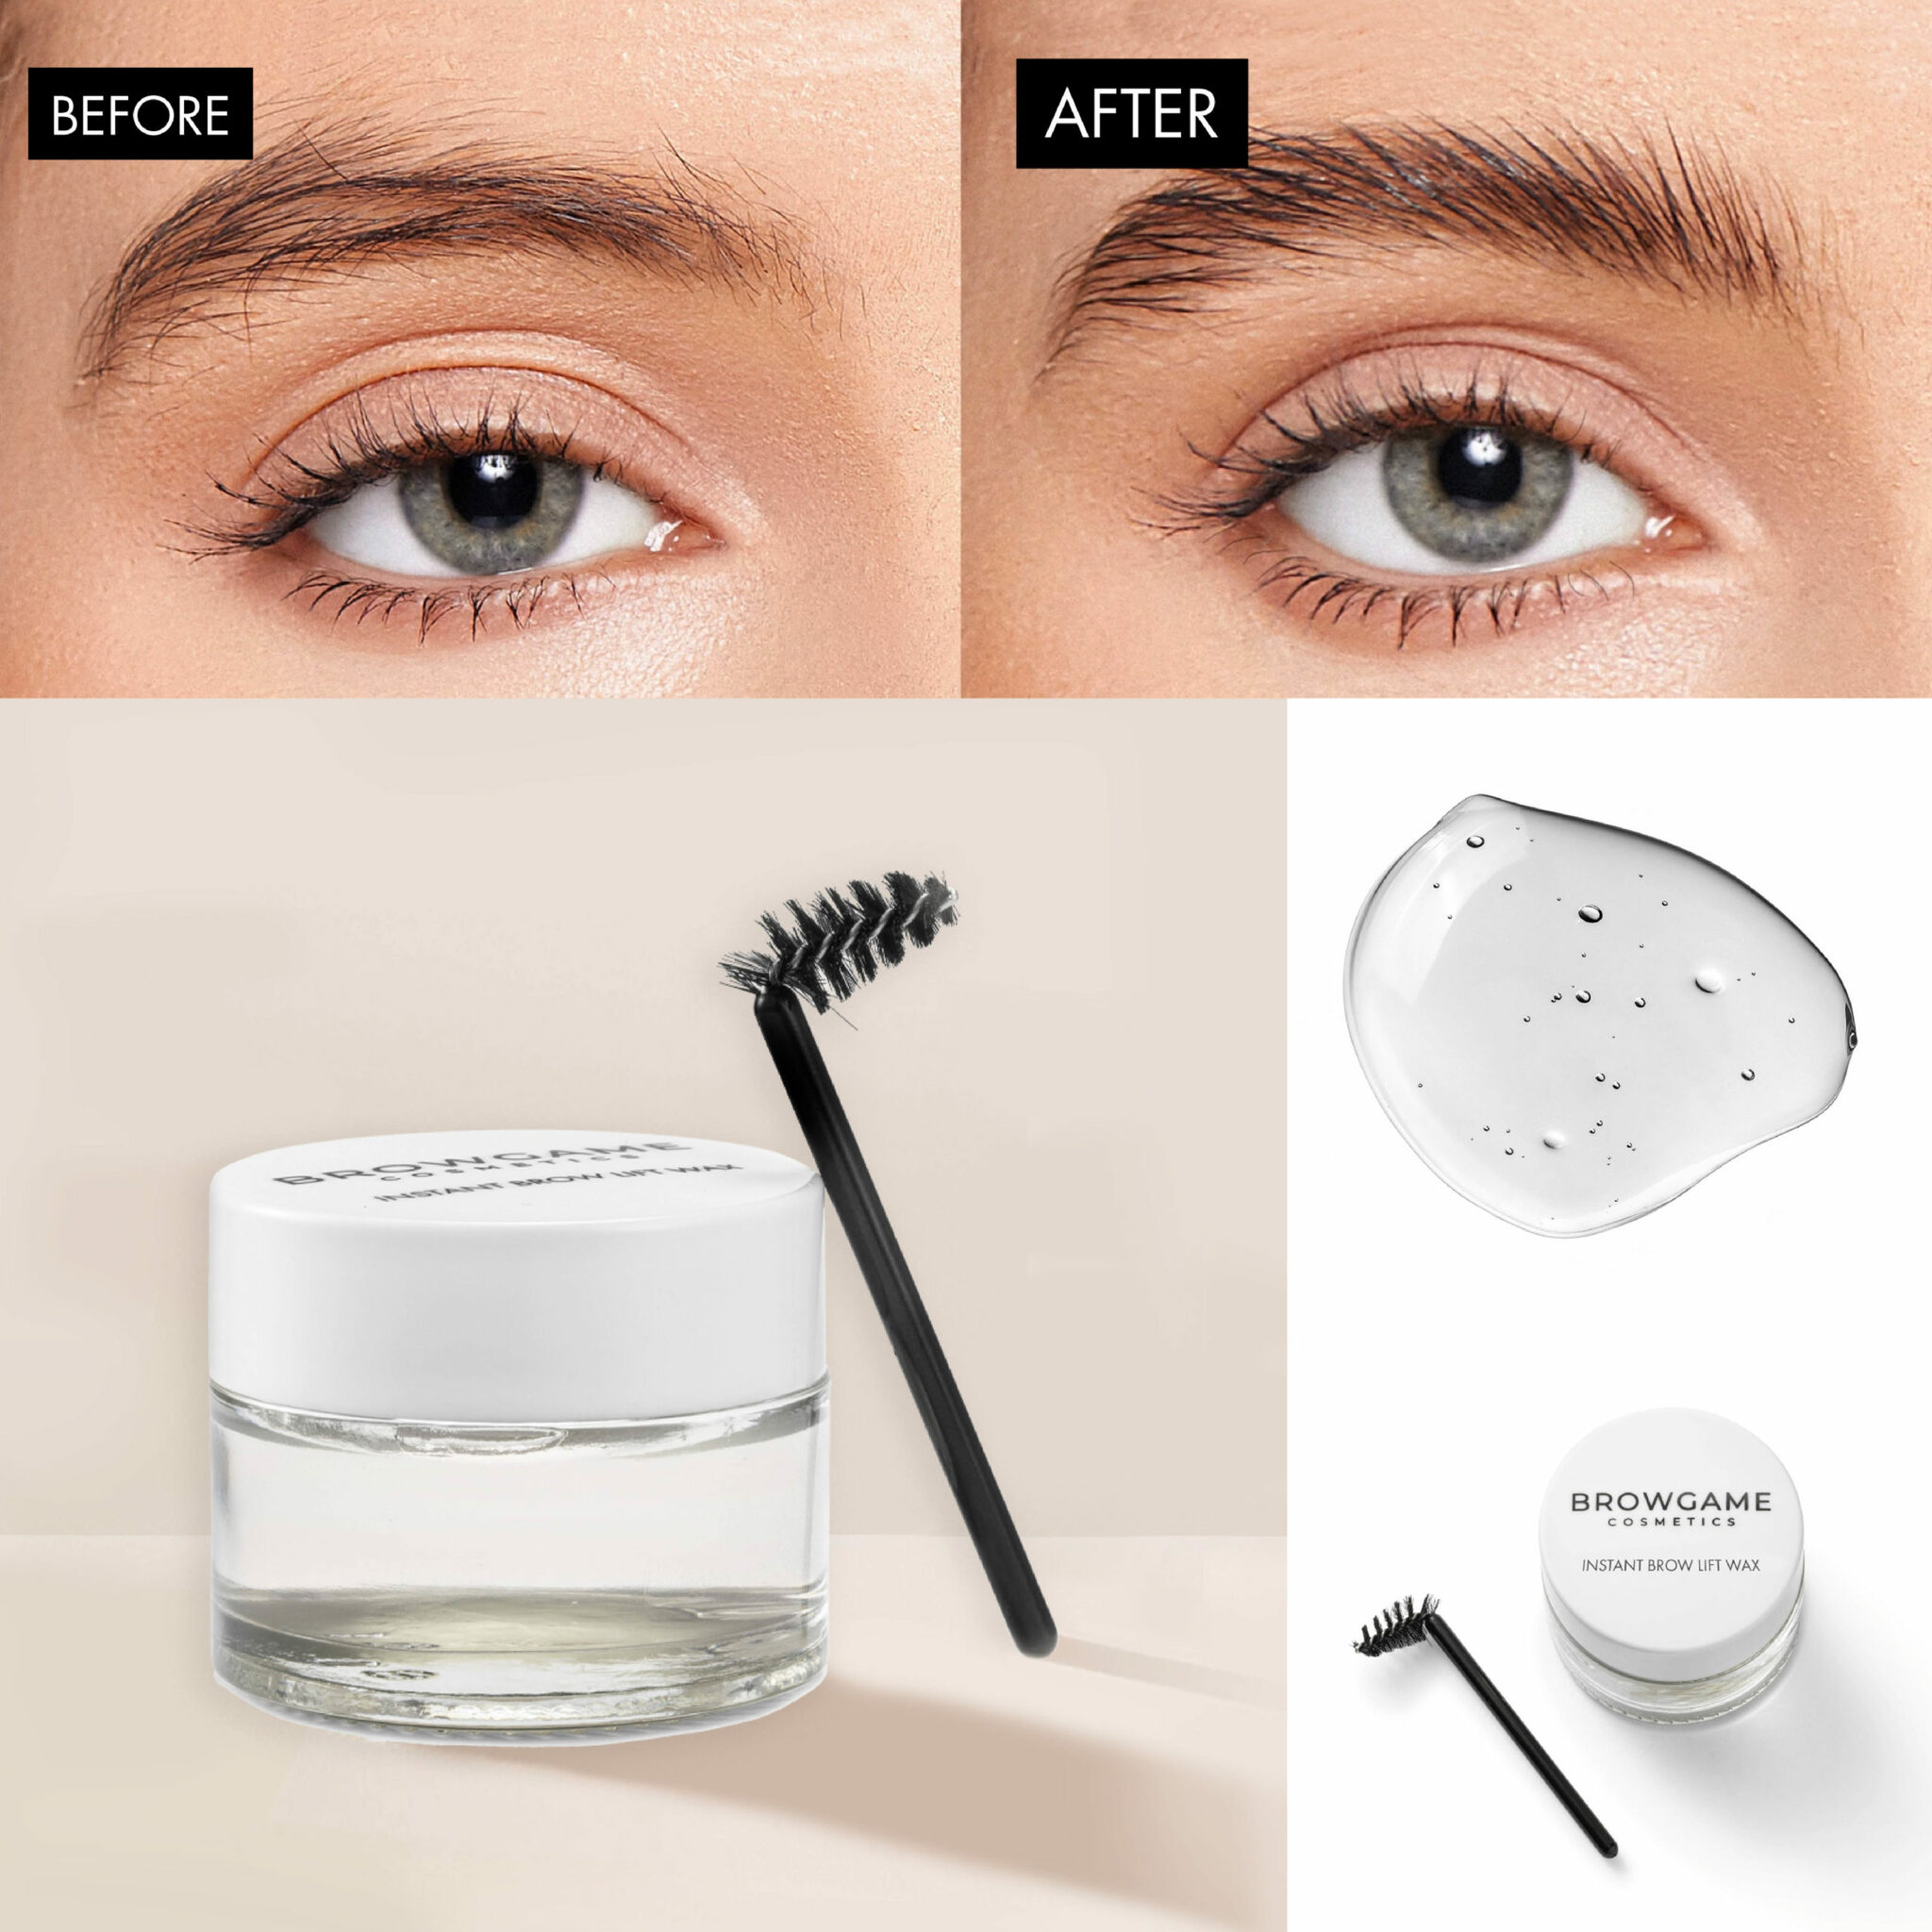 Browgame Cosmetics - Instant Brow Lift Wax - bryn vox blank